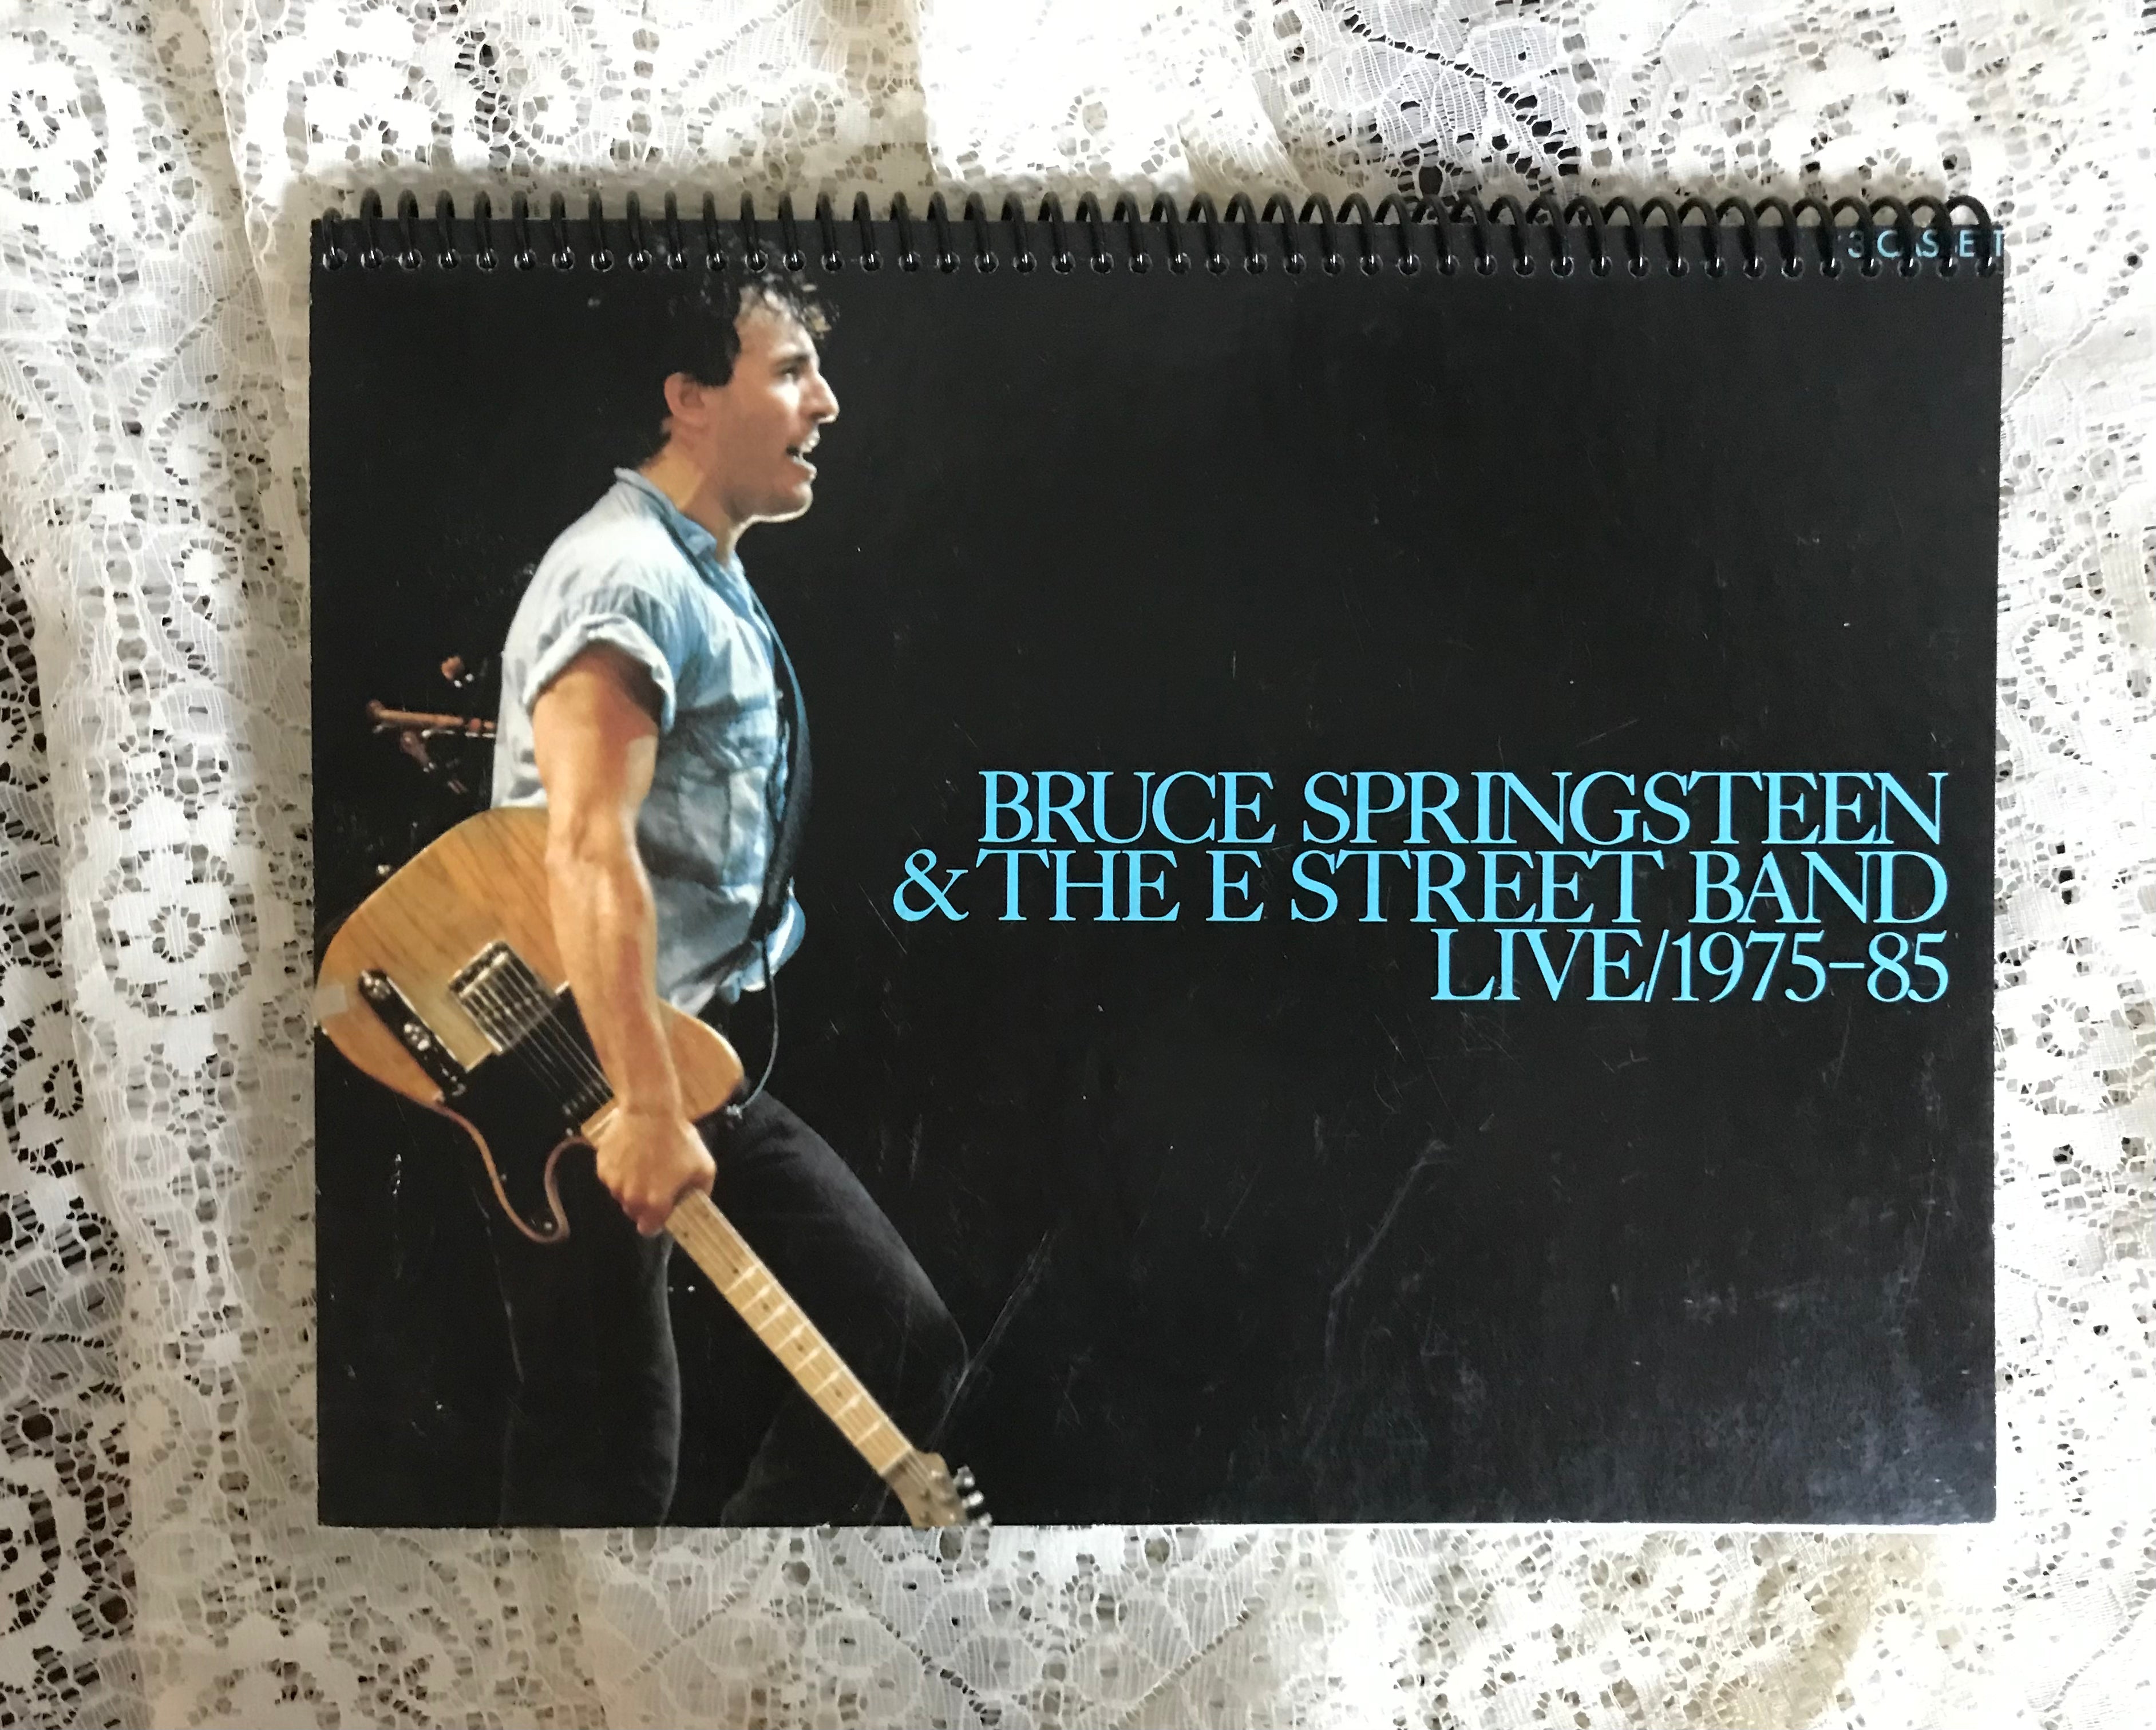 Bruce Springsteen and the E Street Band Album Cover Notebook